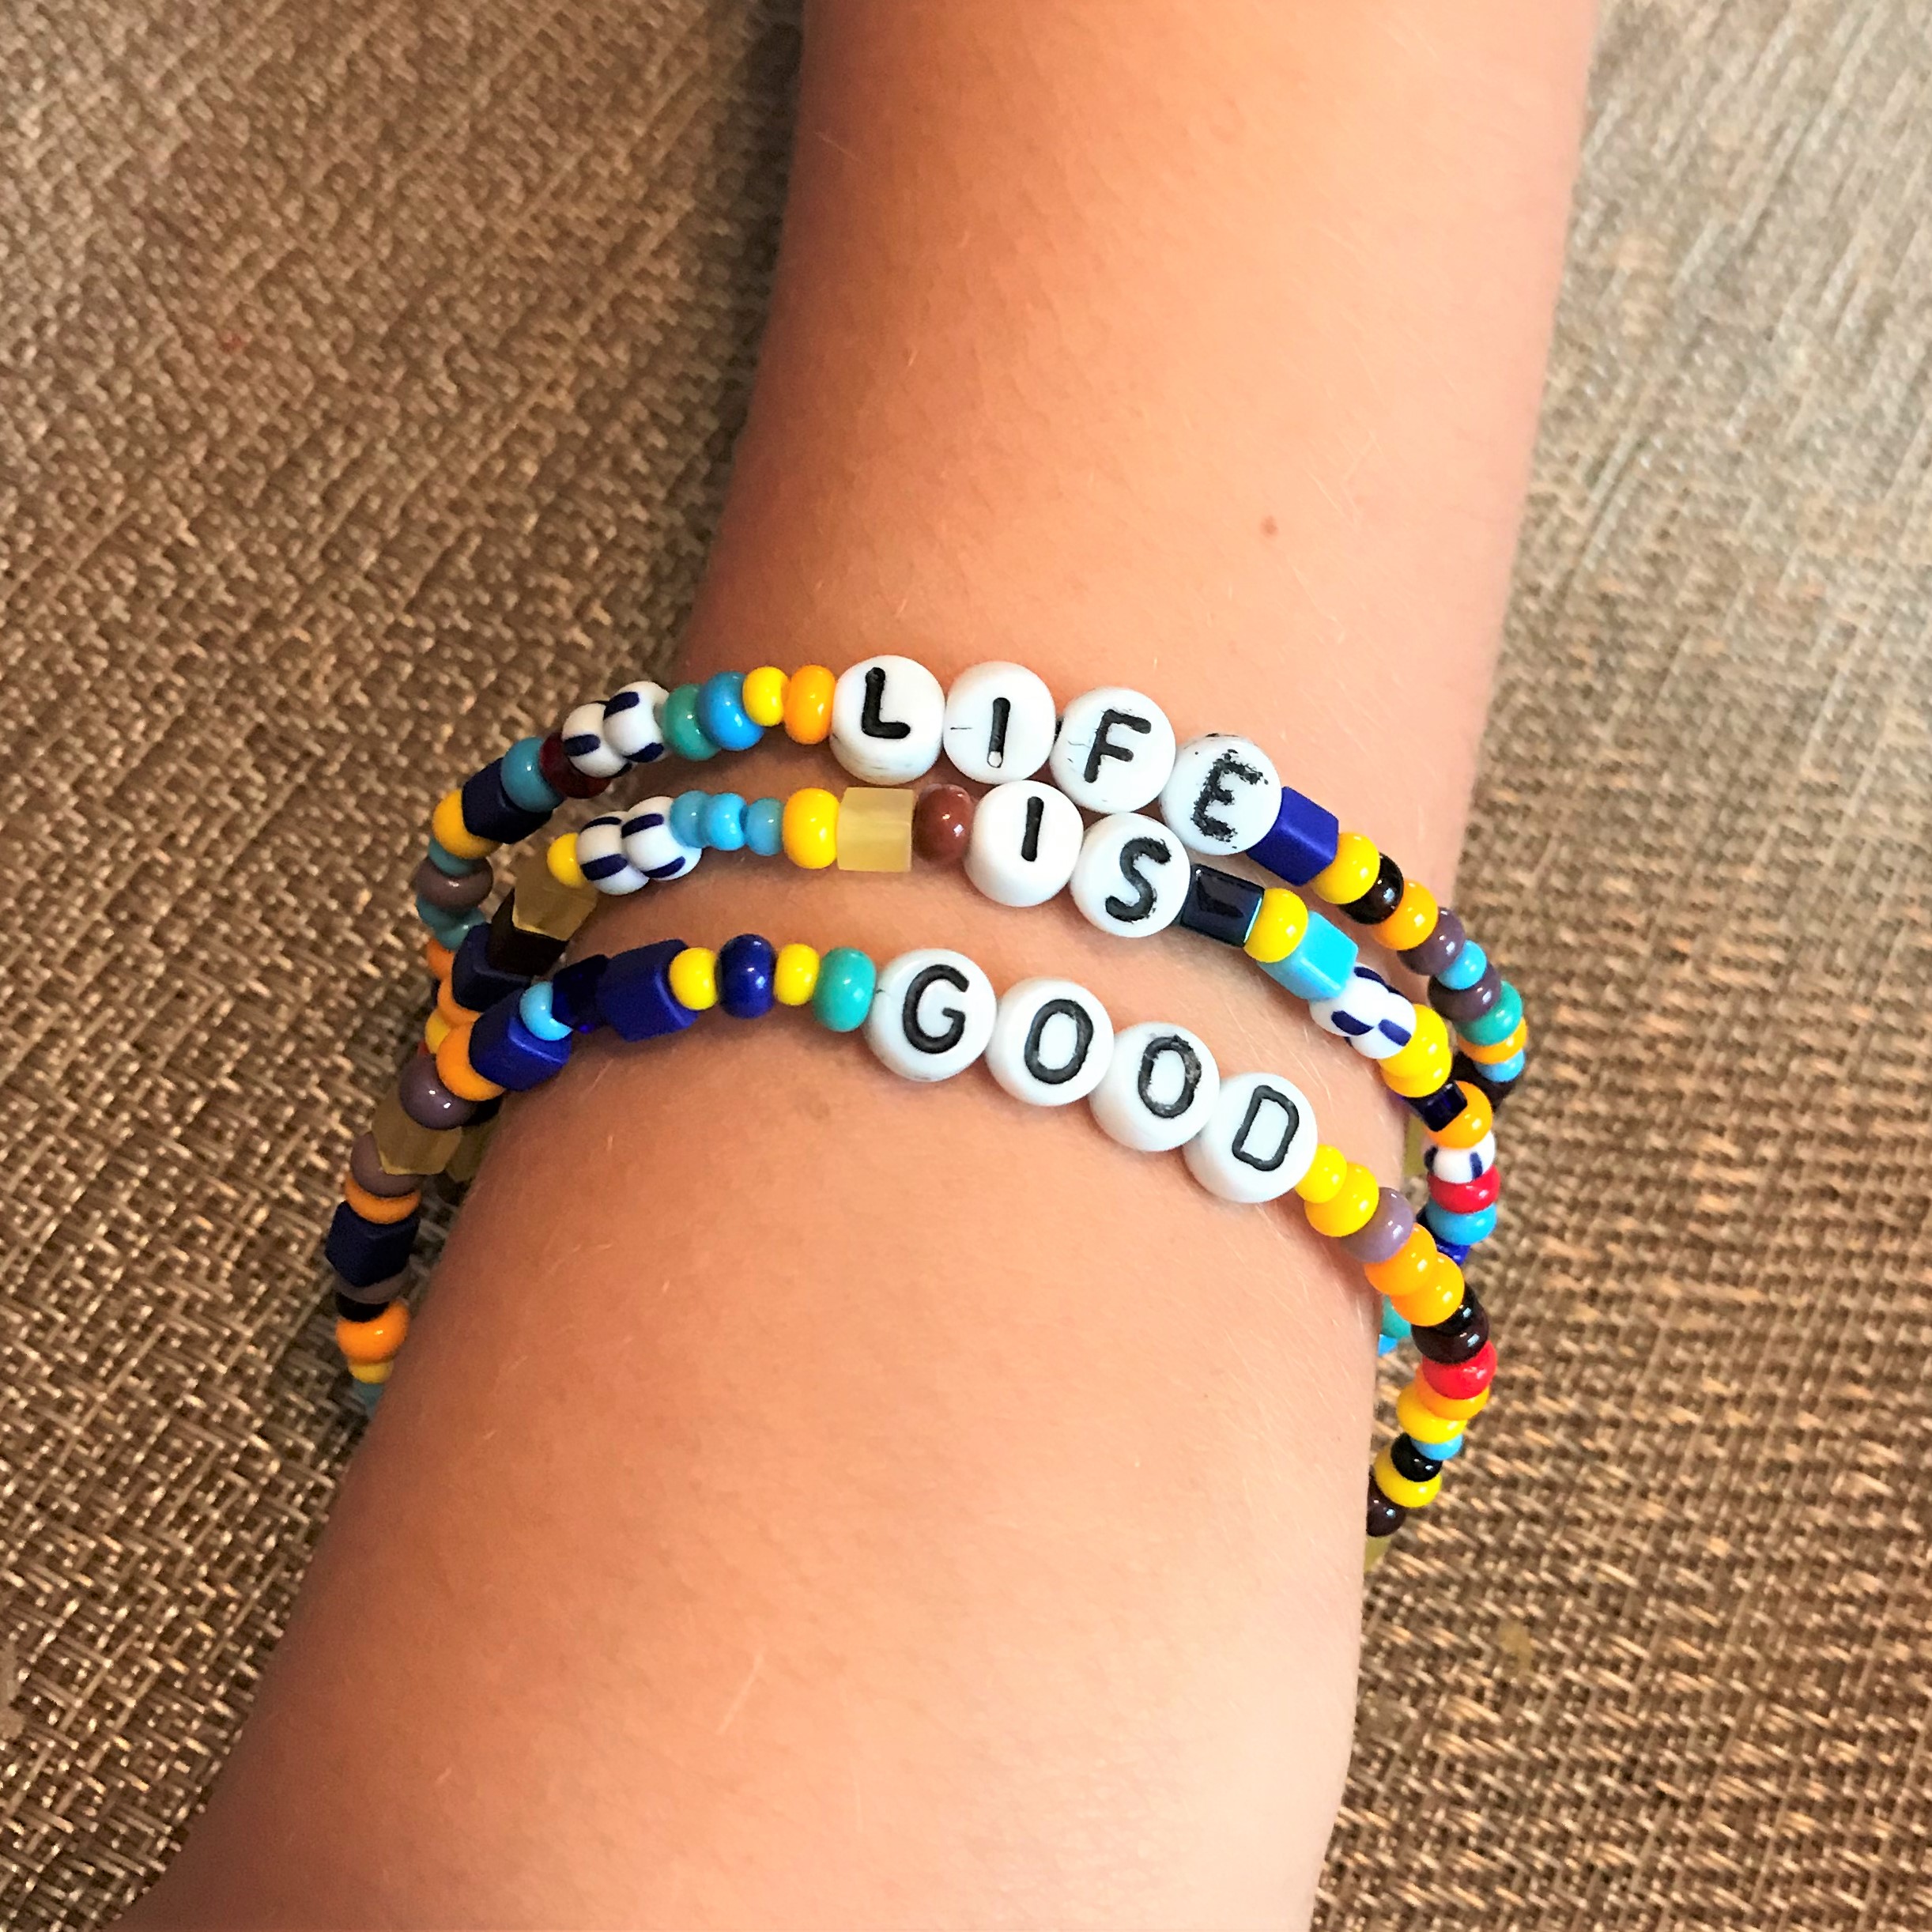 https://justbeadit.net/wp-content/uploads/2019/11/Bead-Camp-Bracelets-Rainbow-Bracelets-with-Words-or-Initials-Life-is-Good-3-Count.jpg